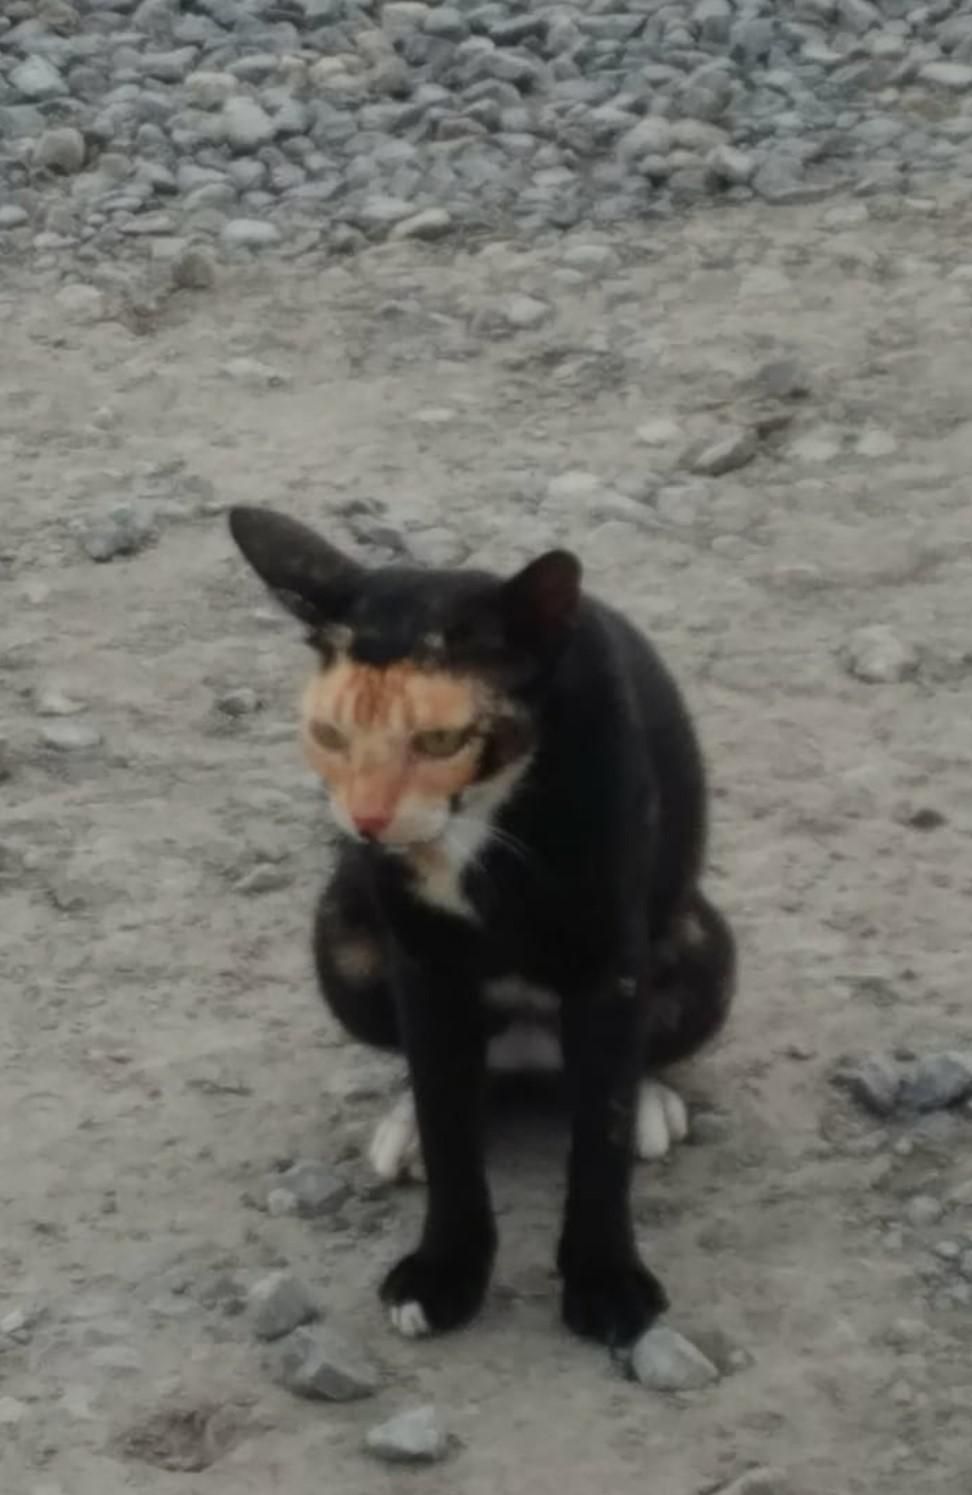 My dad sent me a picture from his jobsite of this cat whose markings make it look like it's being devoured by another goofier cat and is just so bored with the whole situation.